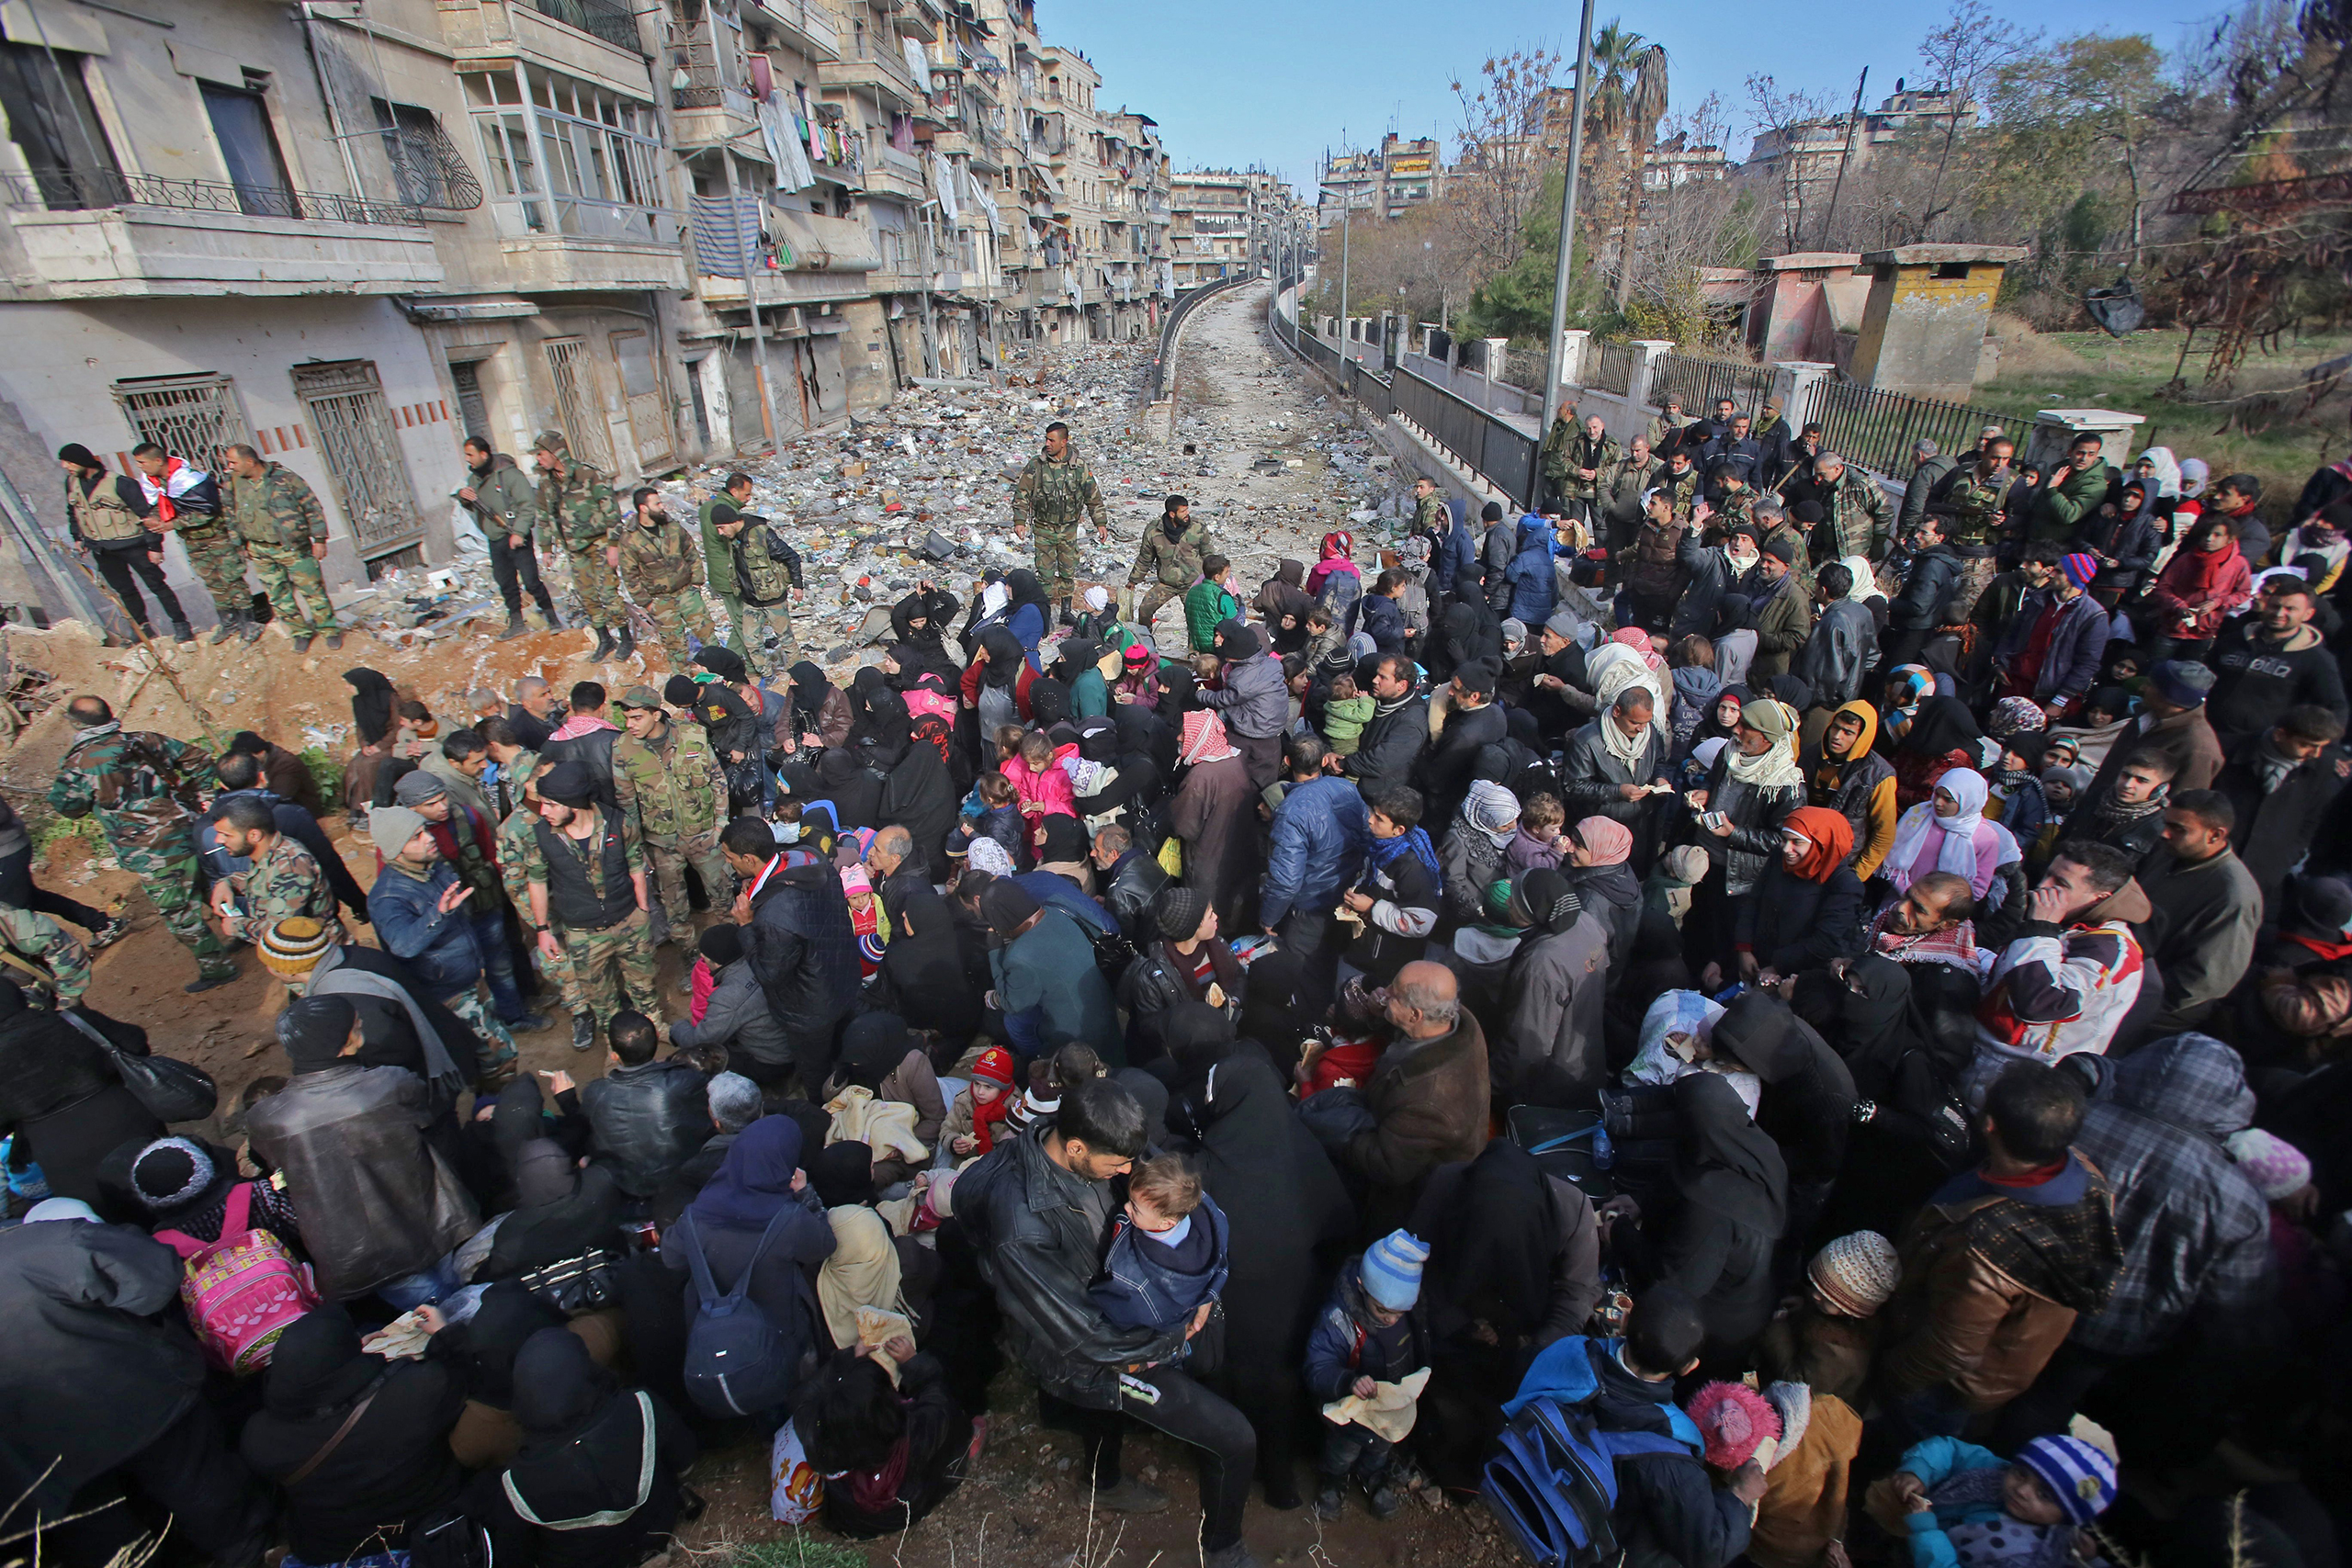 Residents fleeing the violence gather at a checkpoint, manned by pro-government forces, in the Maysaloun neighborhood of Aleppo on Dec. 8, 2016. (Youssef Karwashan—AFP/Getty Images)